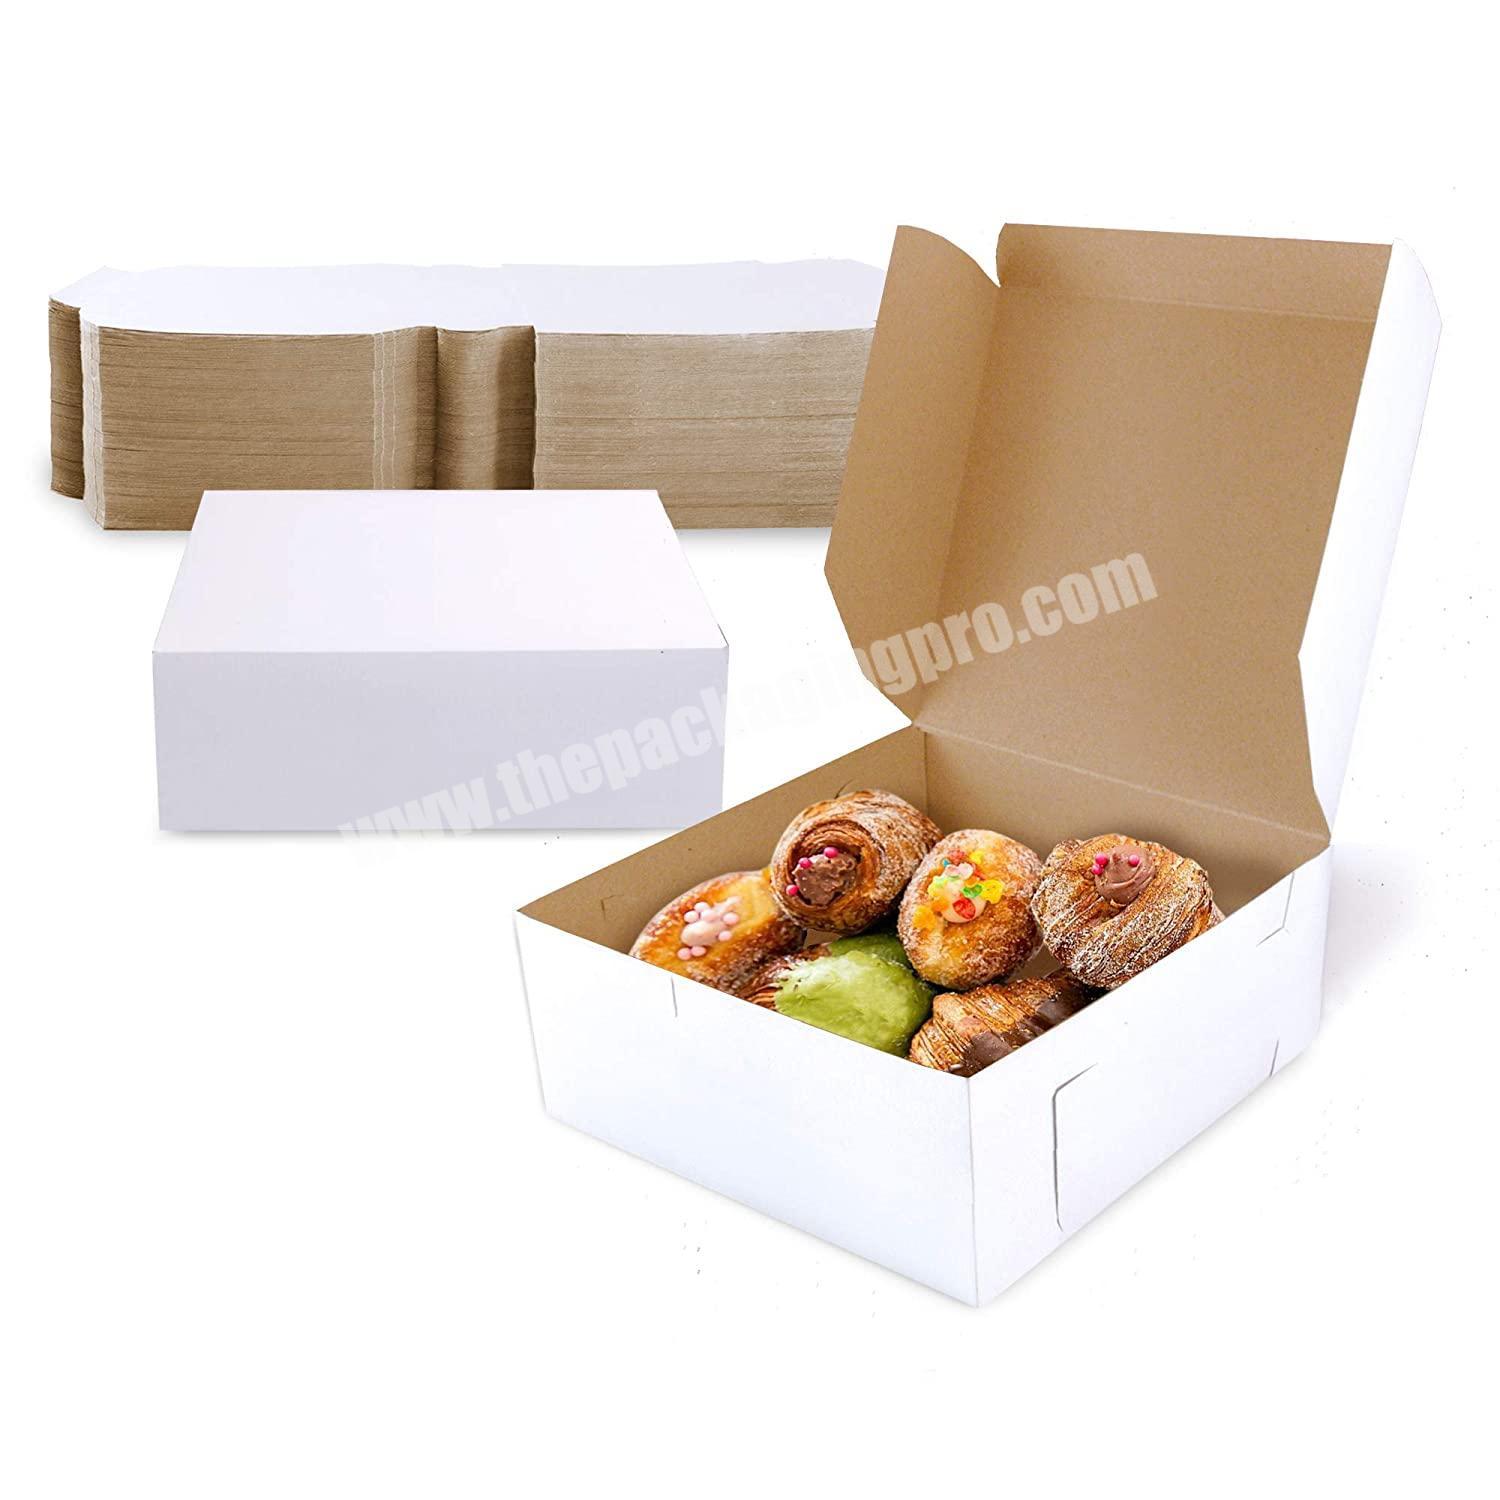 7 x 7 x 3 White Inches Small Dark Brown Bakery Box for Cookies Compostable Kraft Paper Cardboard for Baked Goods Pie Cake boxes